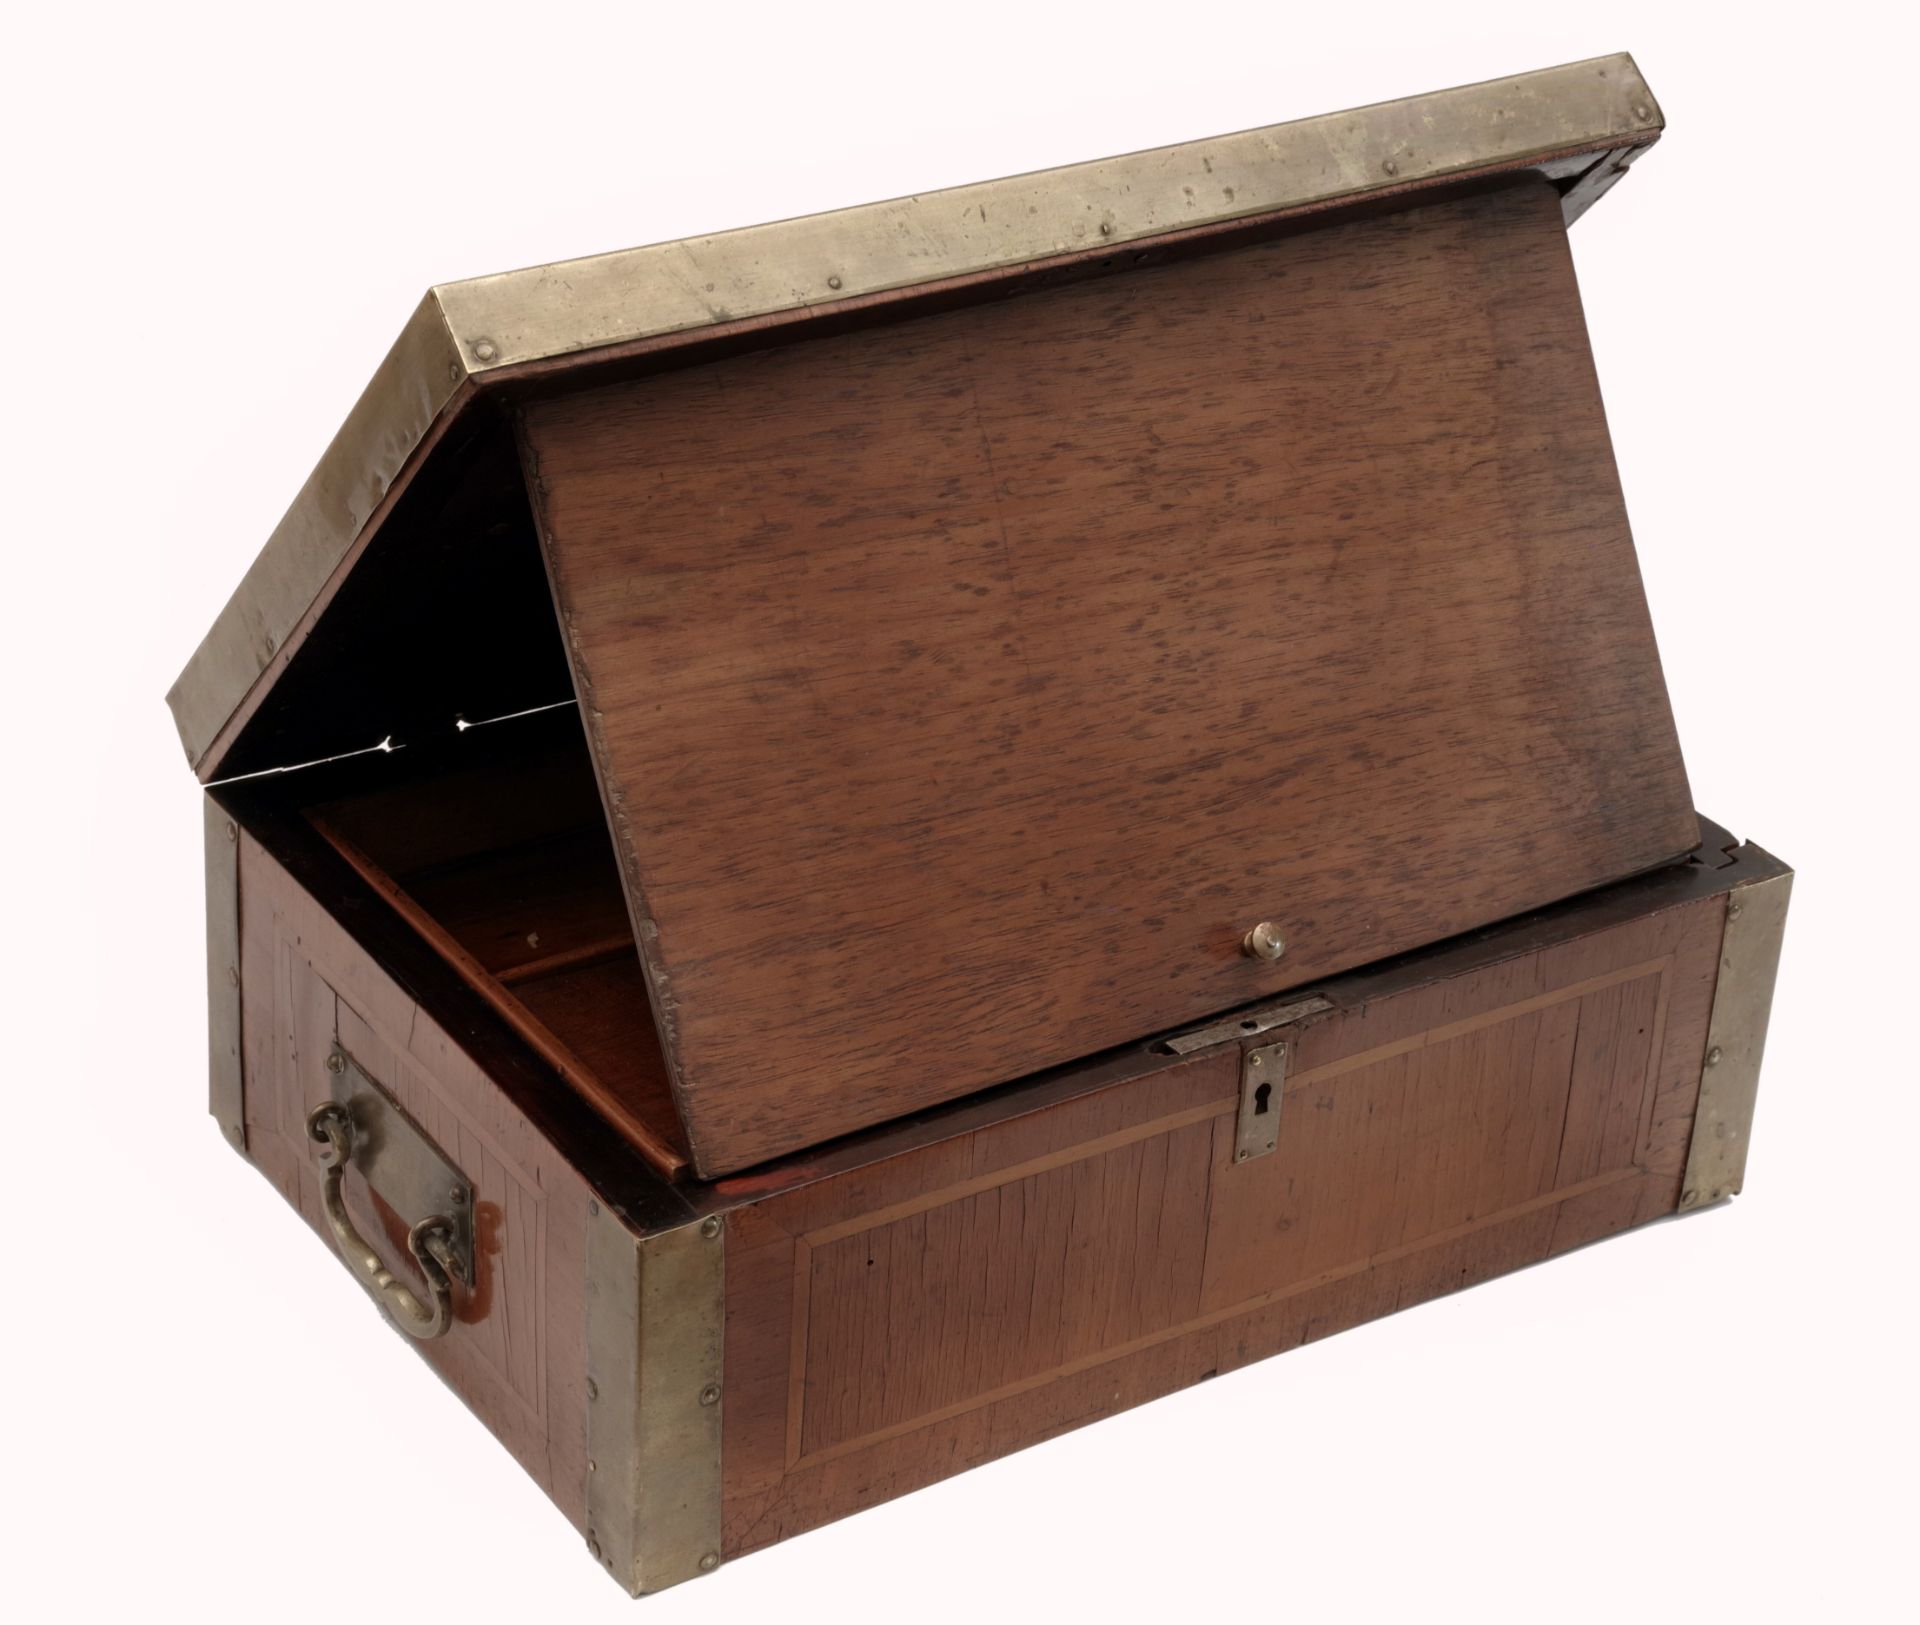 A Jewelry Box with Secret Spaces - Image 2 of 4